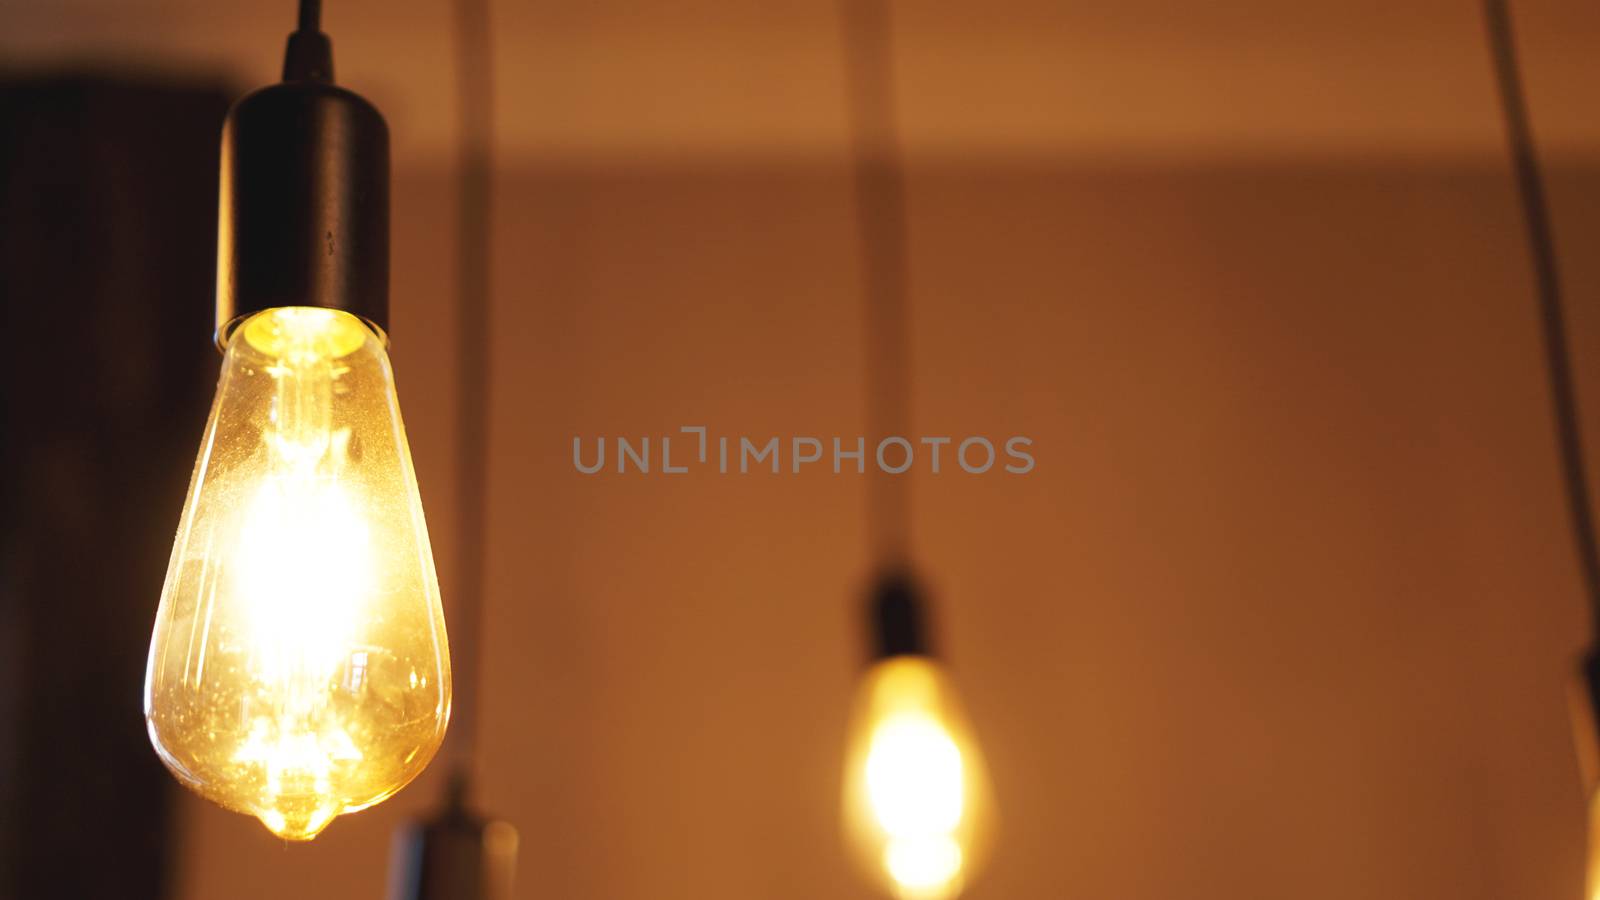 Decorative antique edison style light tungsten bulbs against yellow wall background